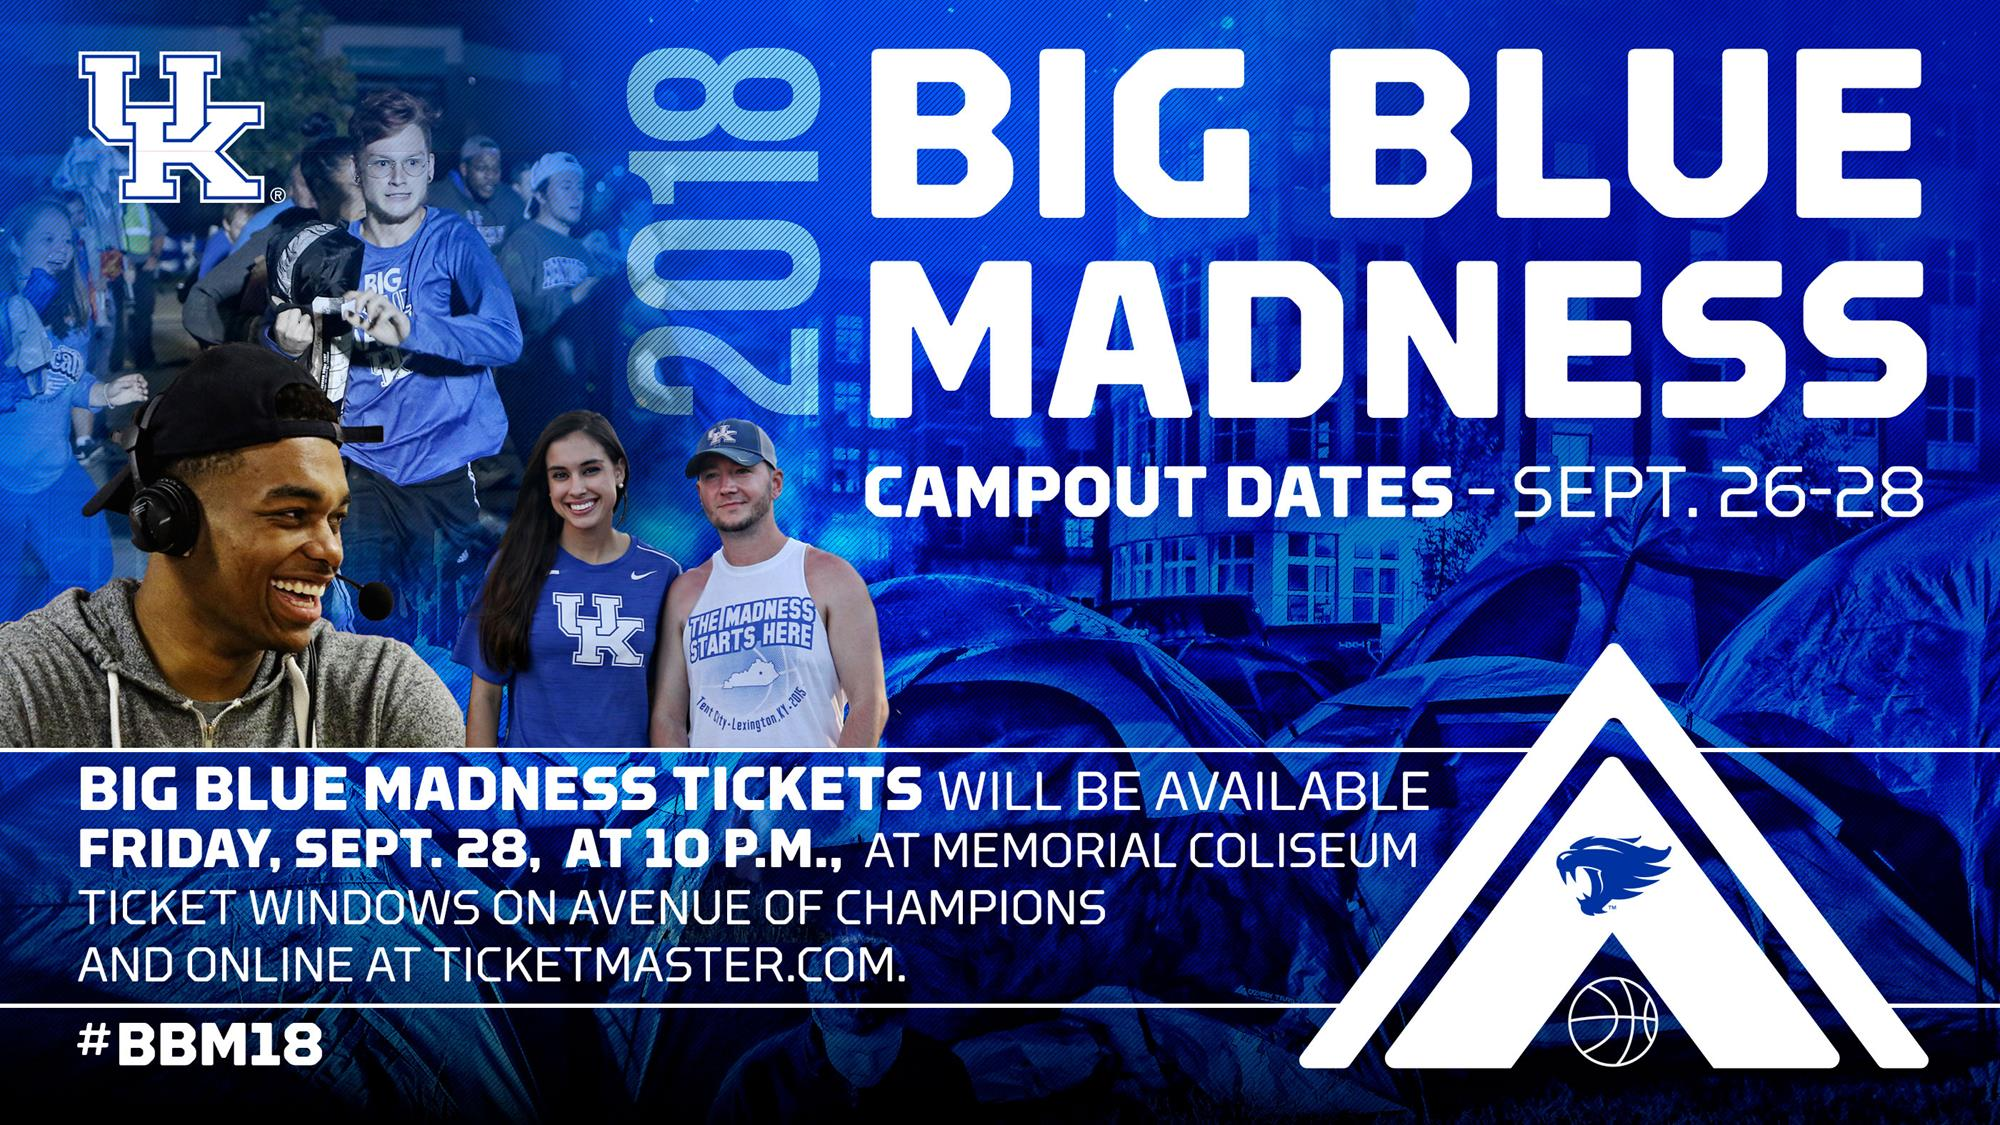 Big Blue Madness Tickets to be Distributed Sept. 28